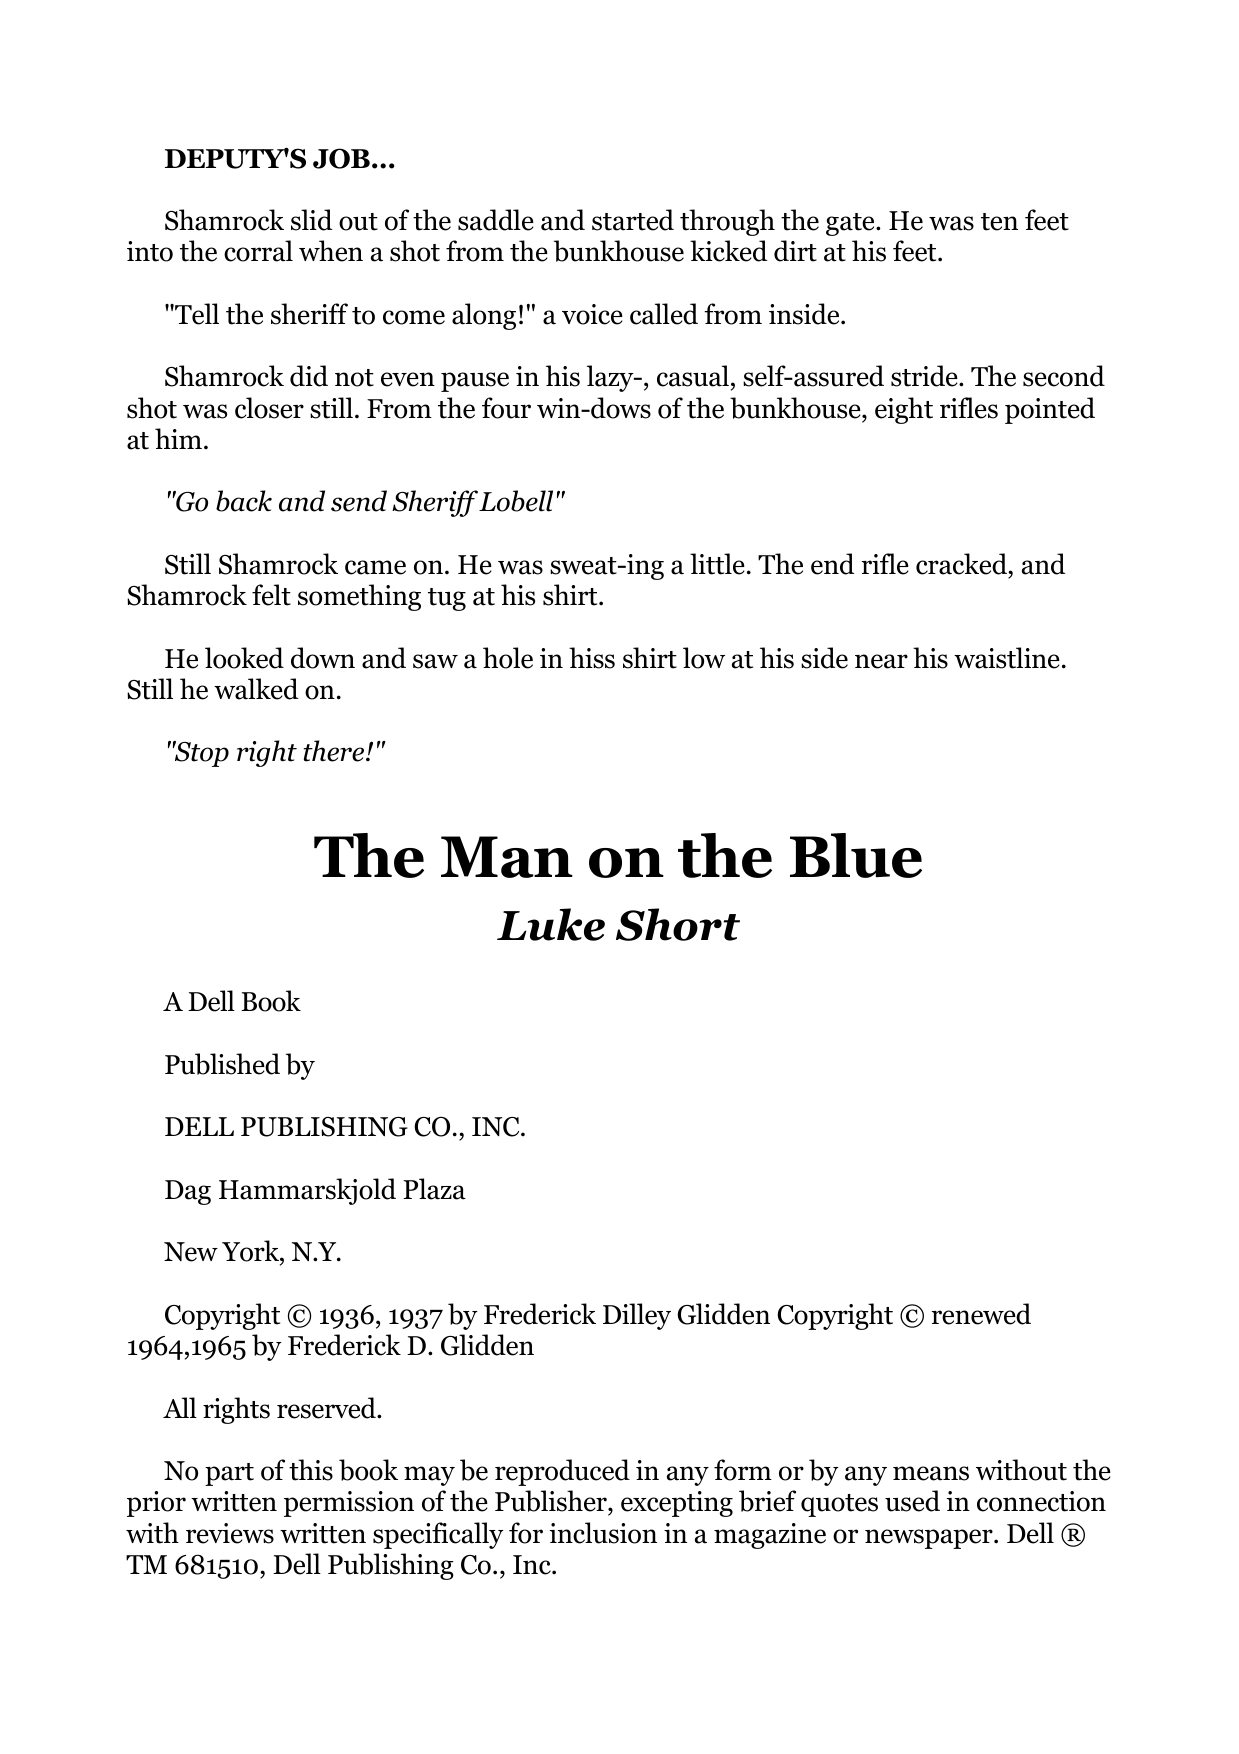 The Man on the Blue